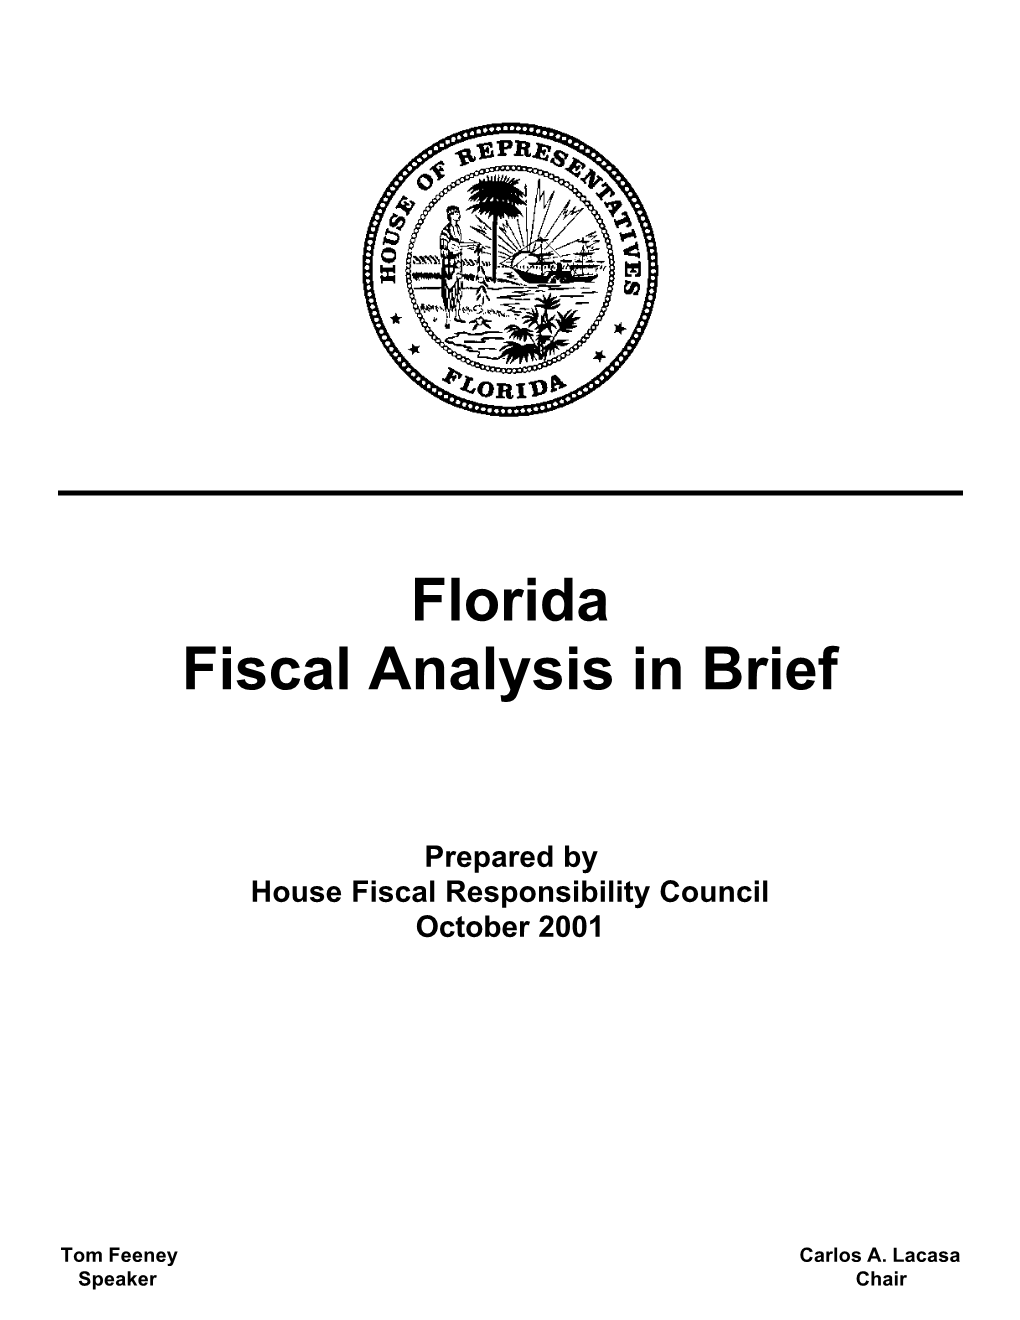 Florida Fiscal Analysis in Brief